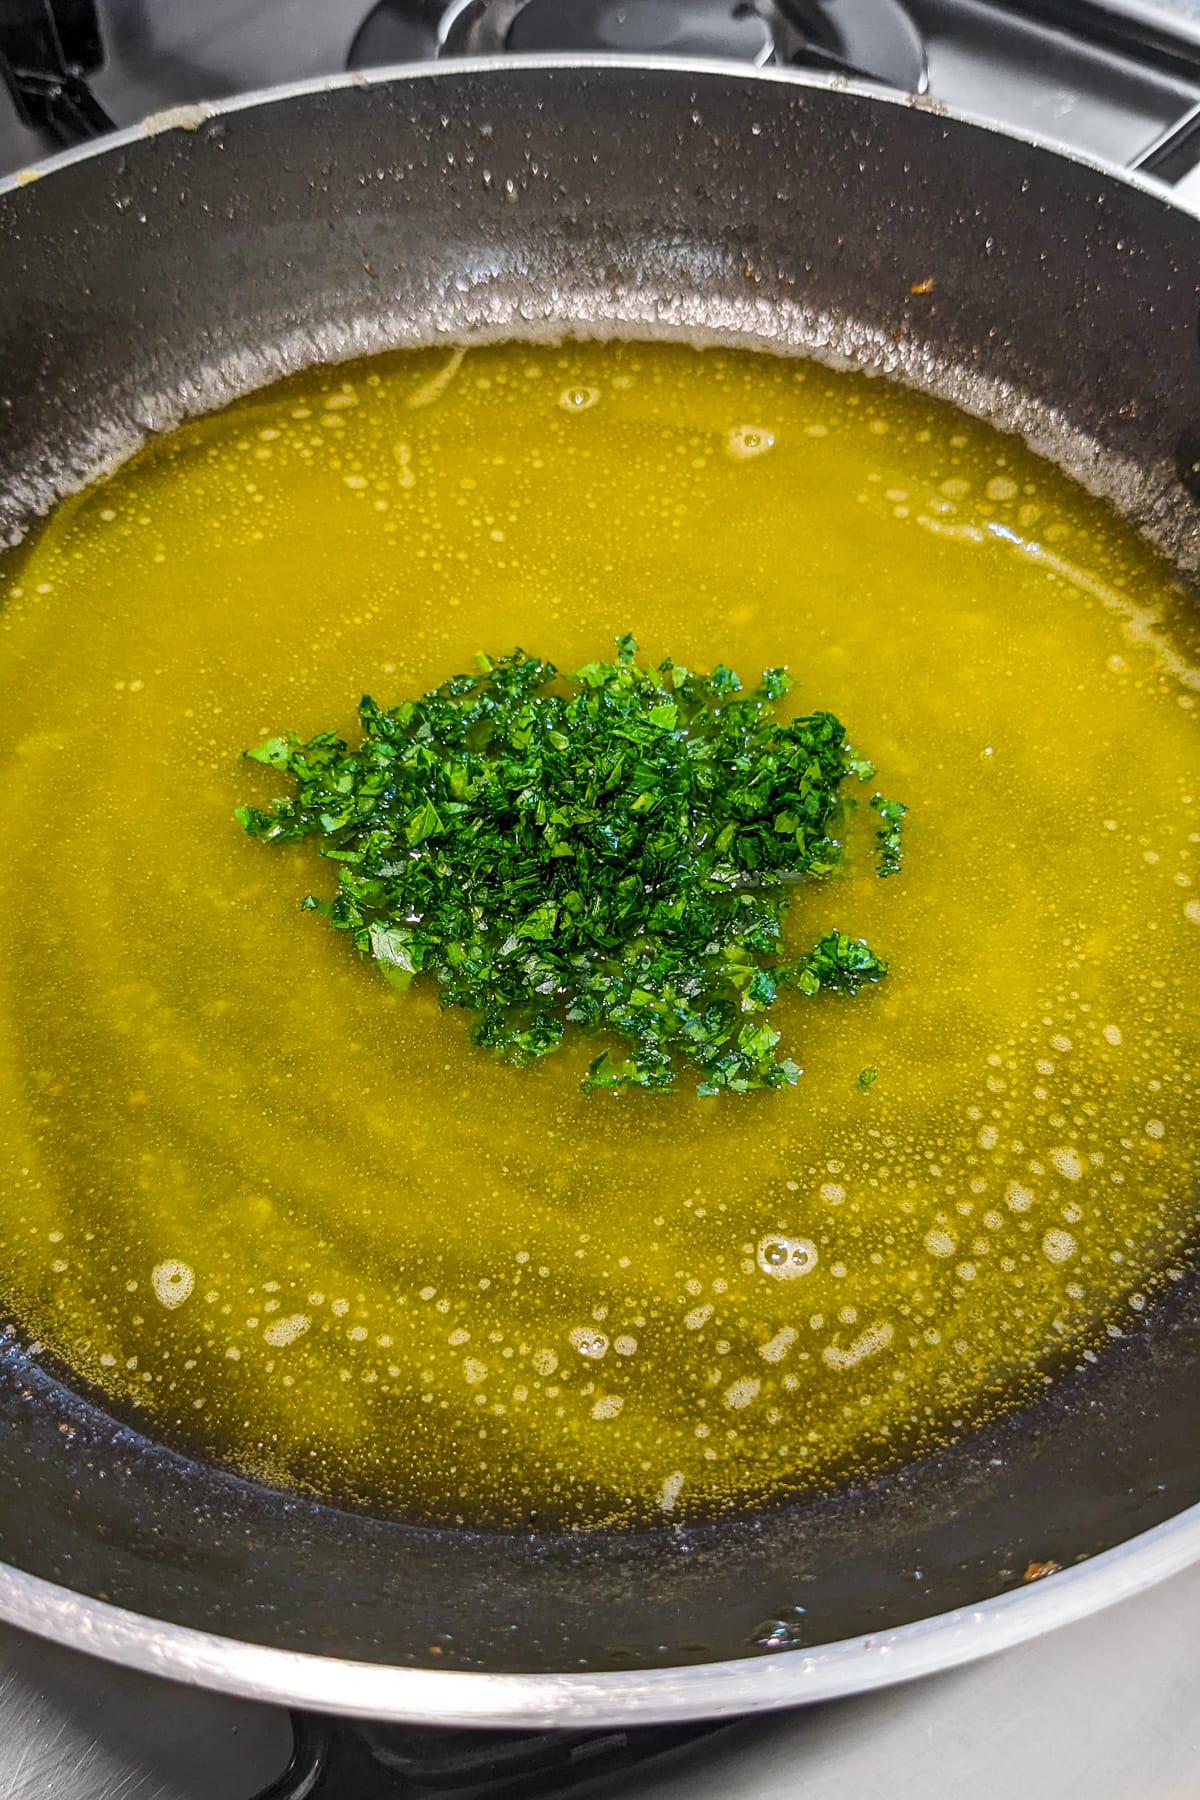 Work with meuniere sauce and freshly chopped parsley.